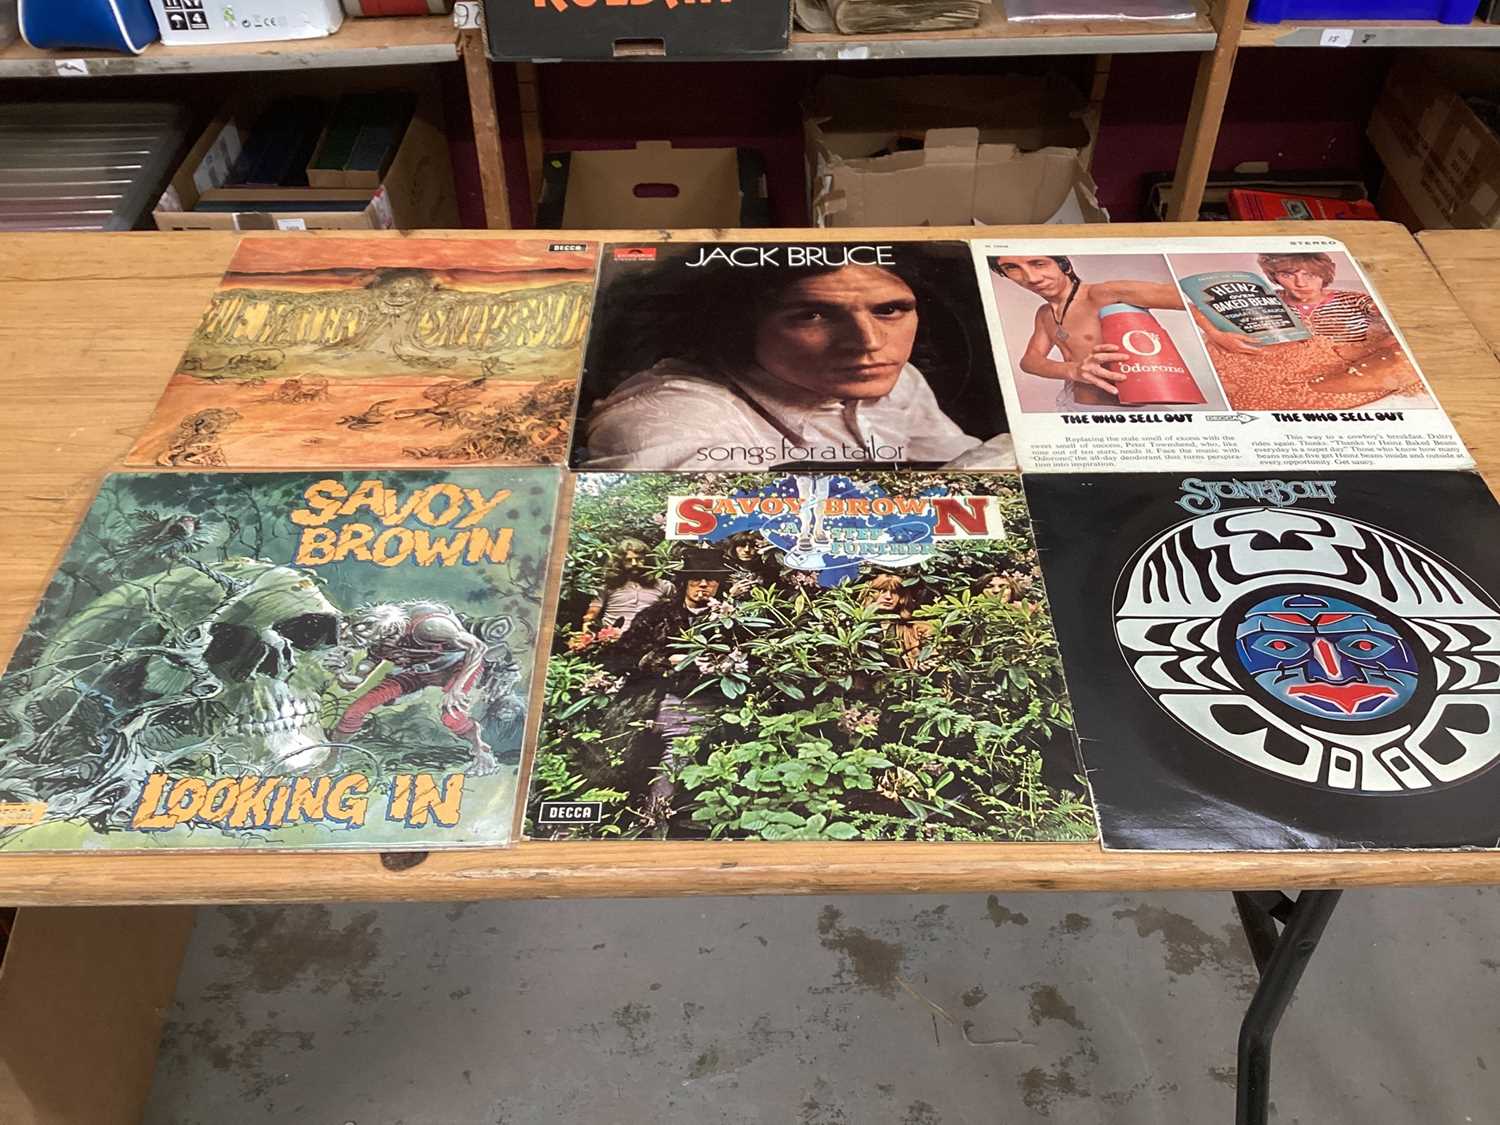 Good selection of LP records including Paul Butterfield, Savoy Brown, Jack Bruce, Stonebolt, Kinks a